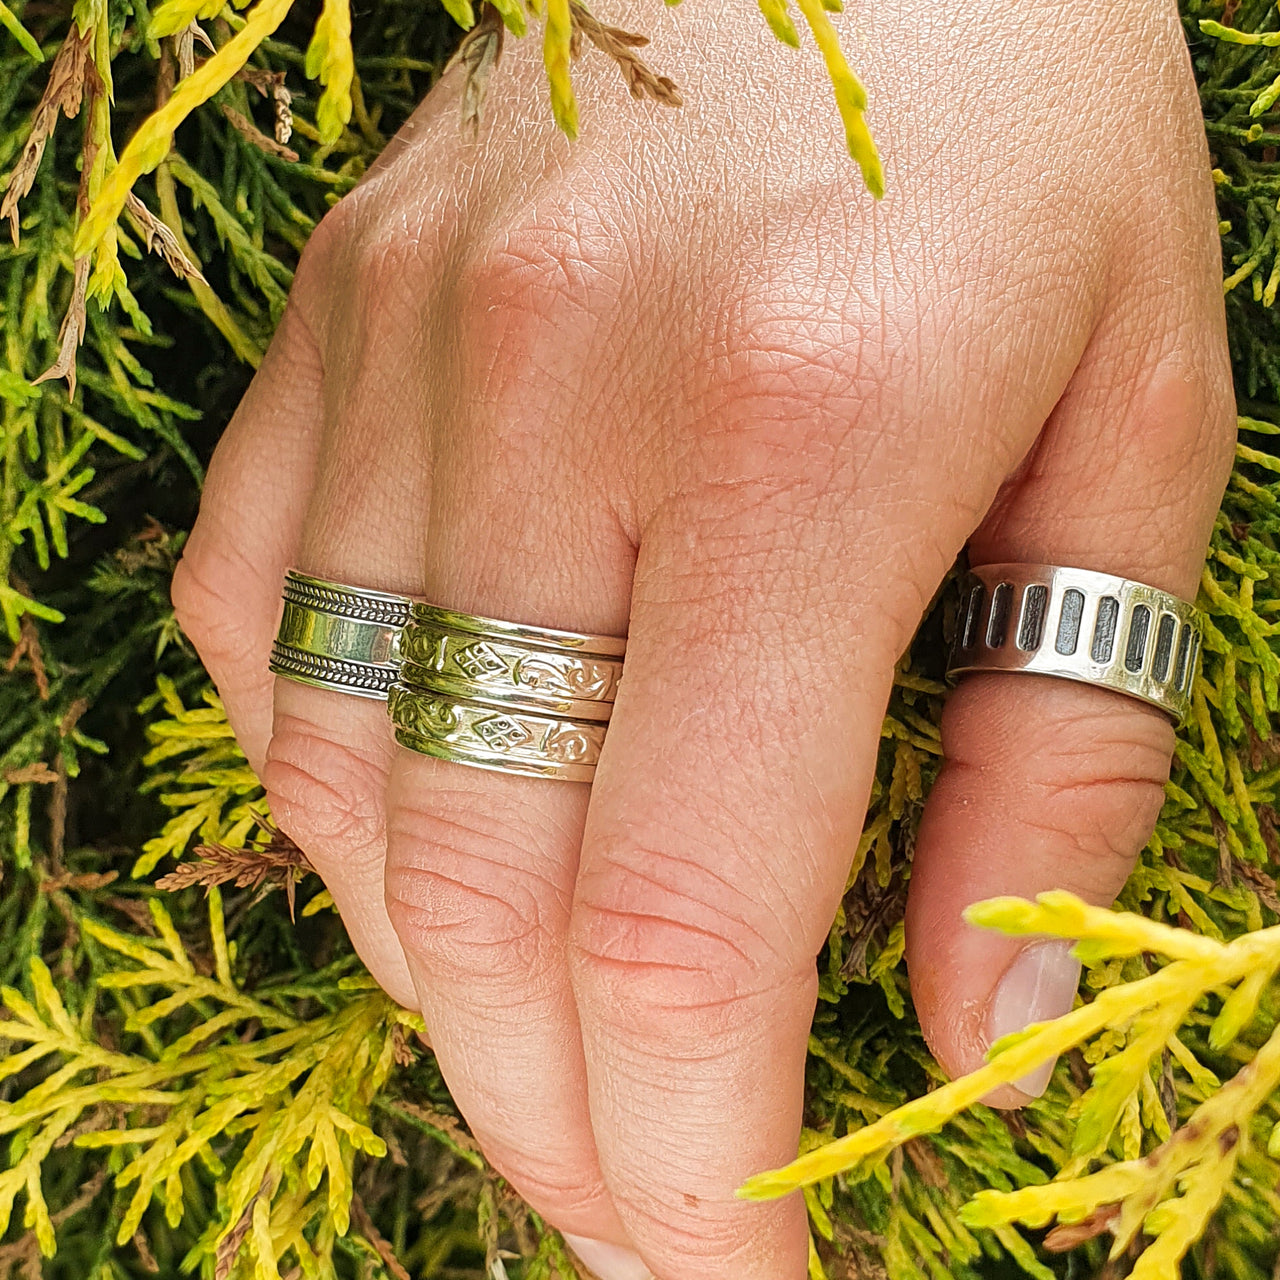 The Ultimate Spinner Ring with boho rings on hand model in nature